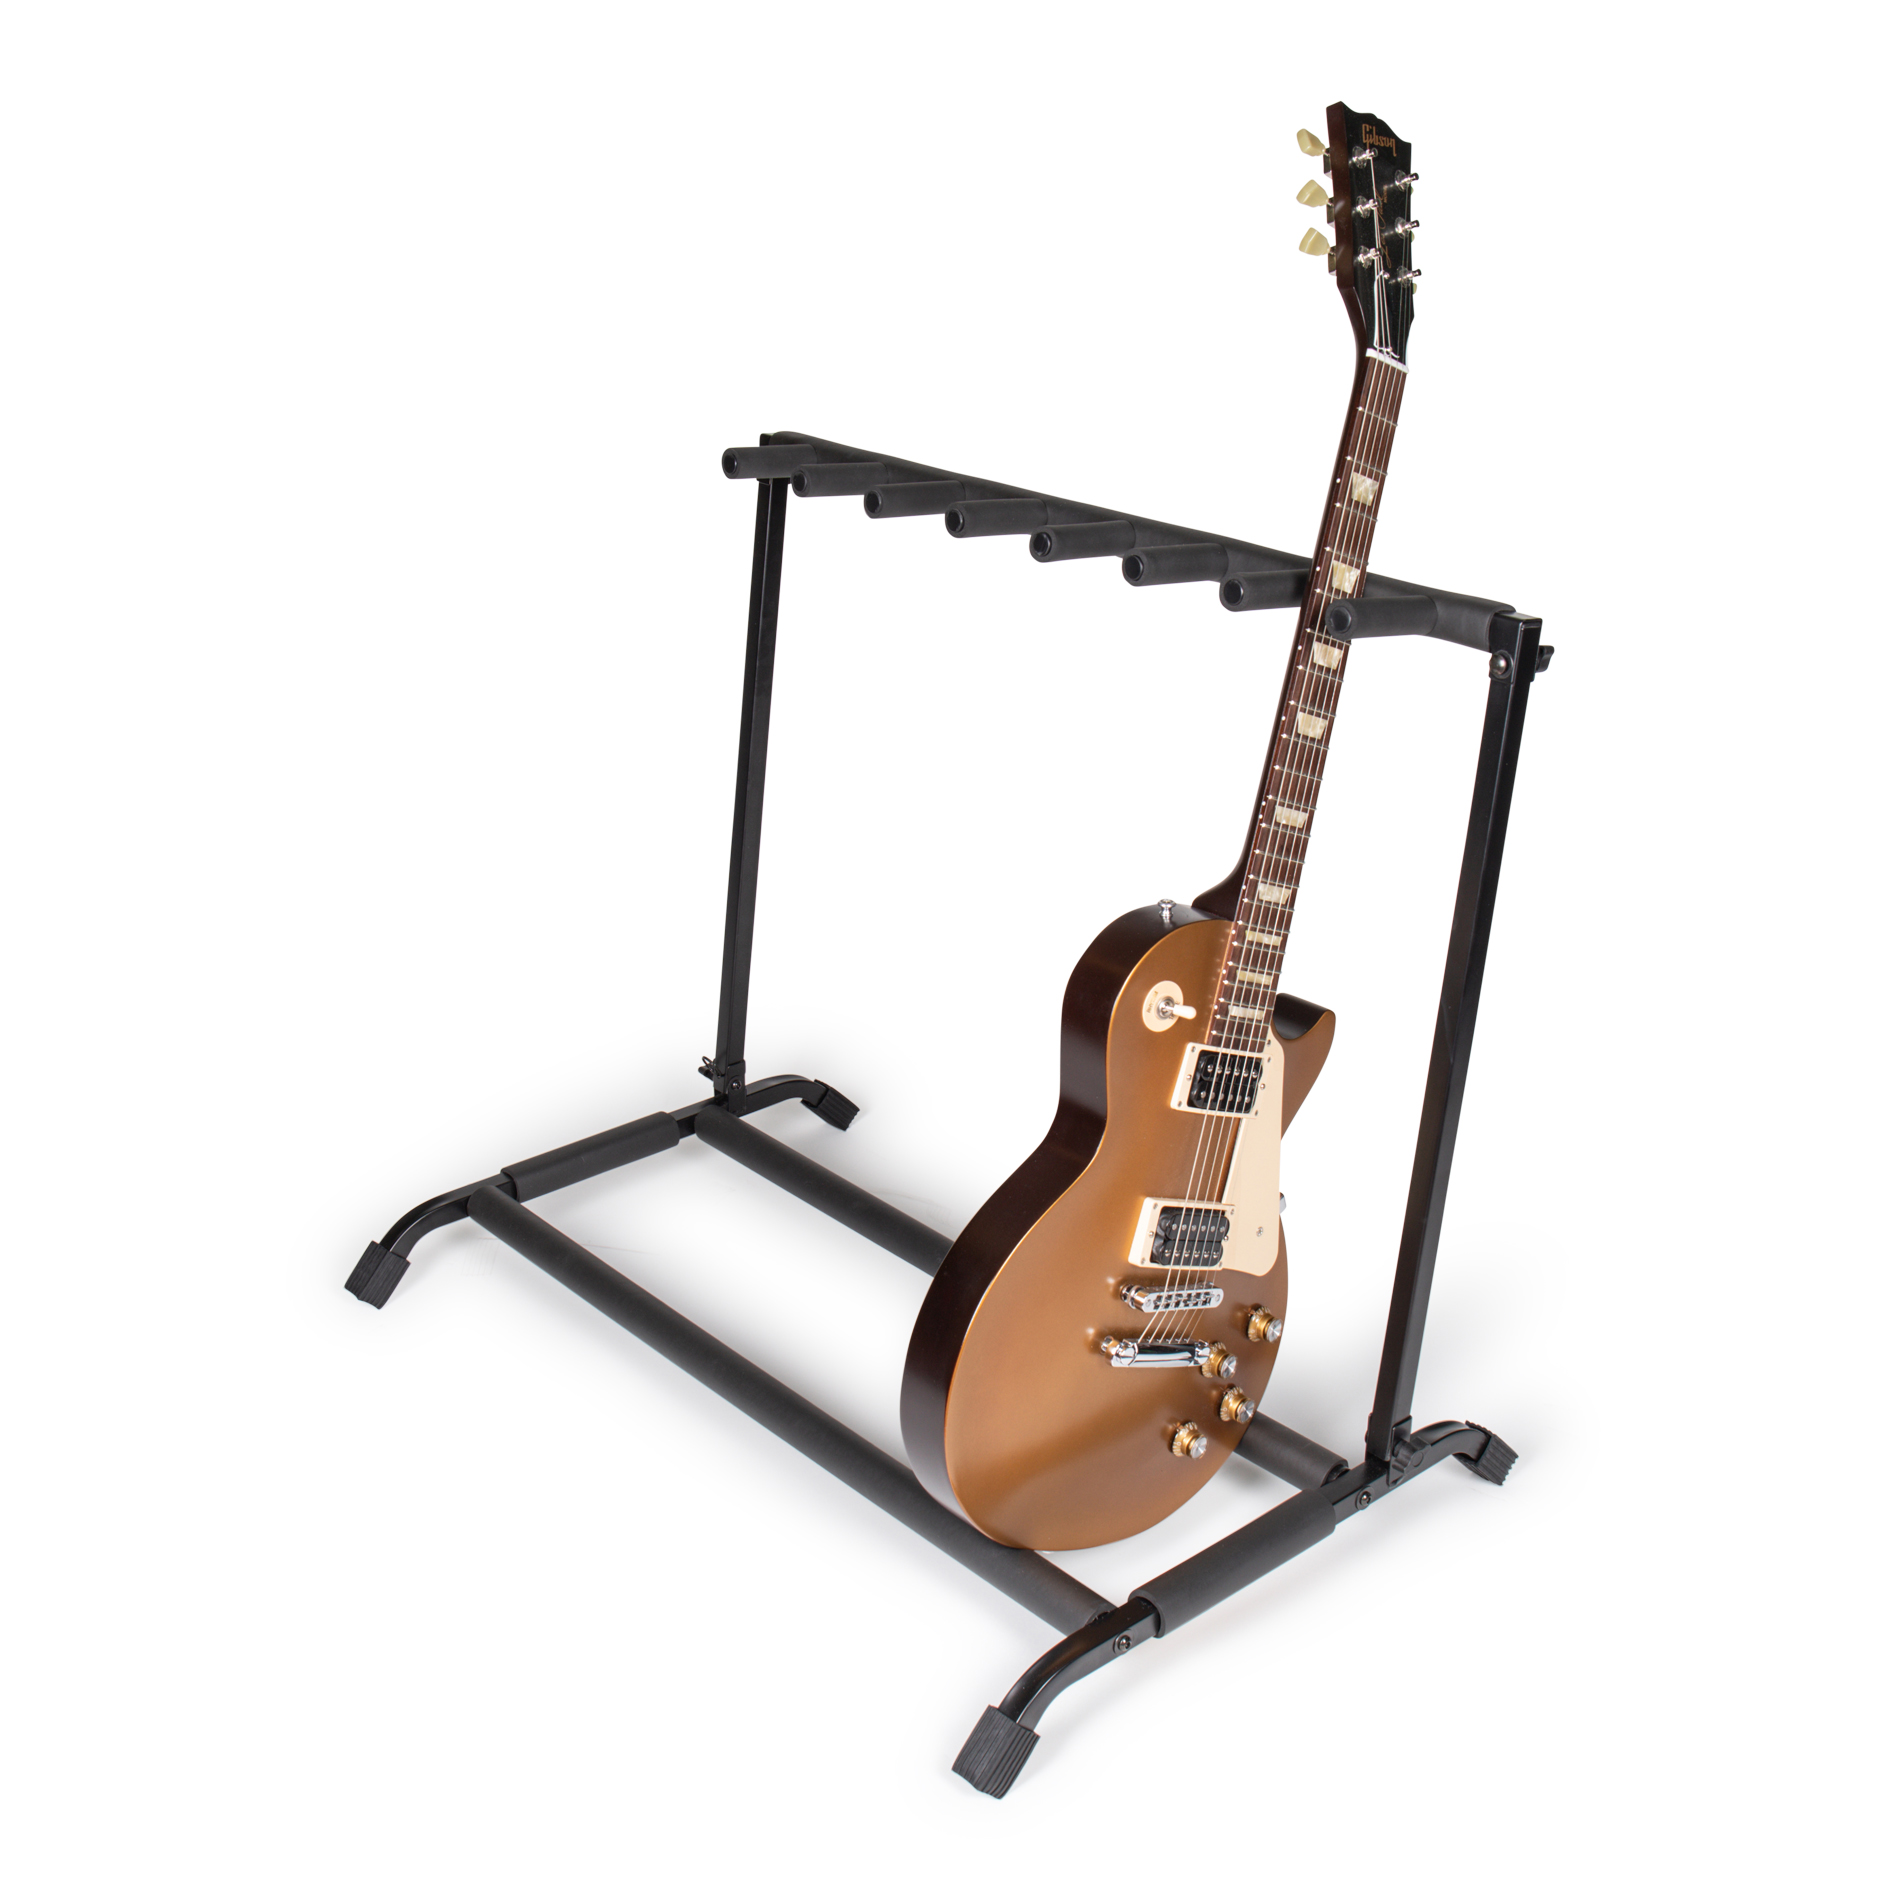 Rok-it 7x Collapsible Guitar Rack